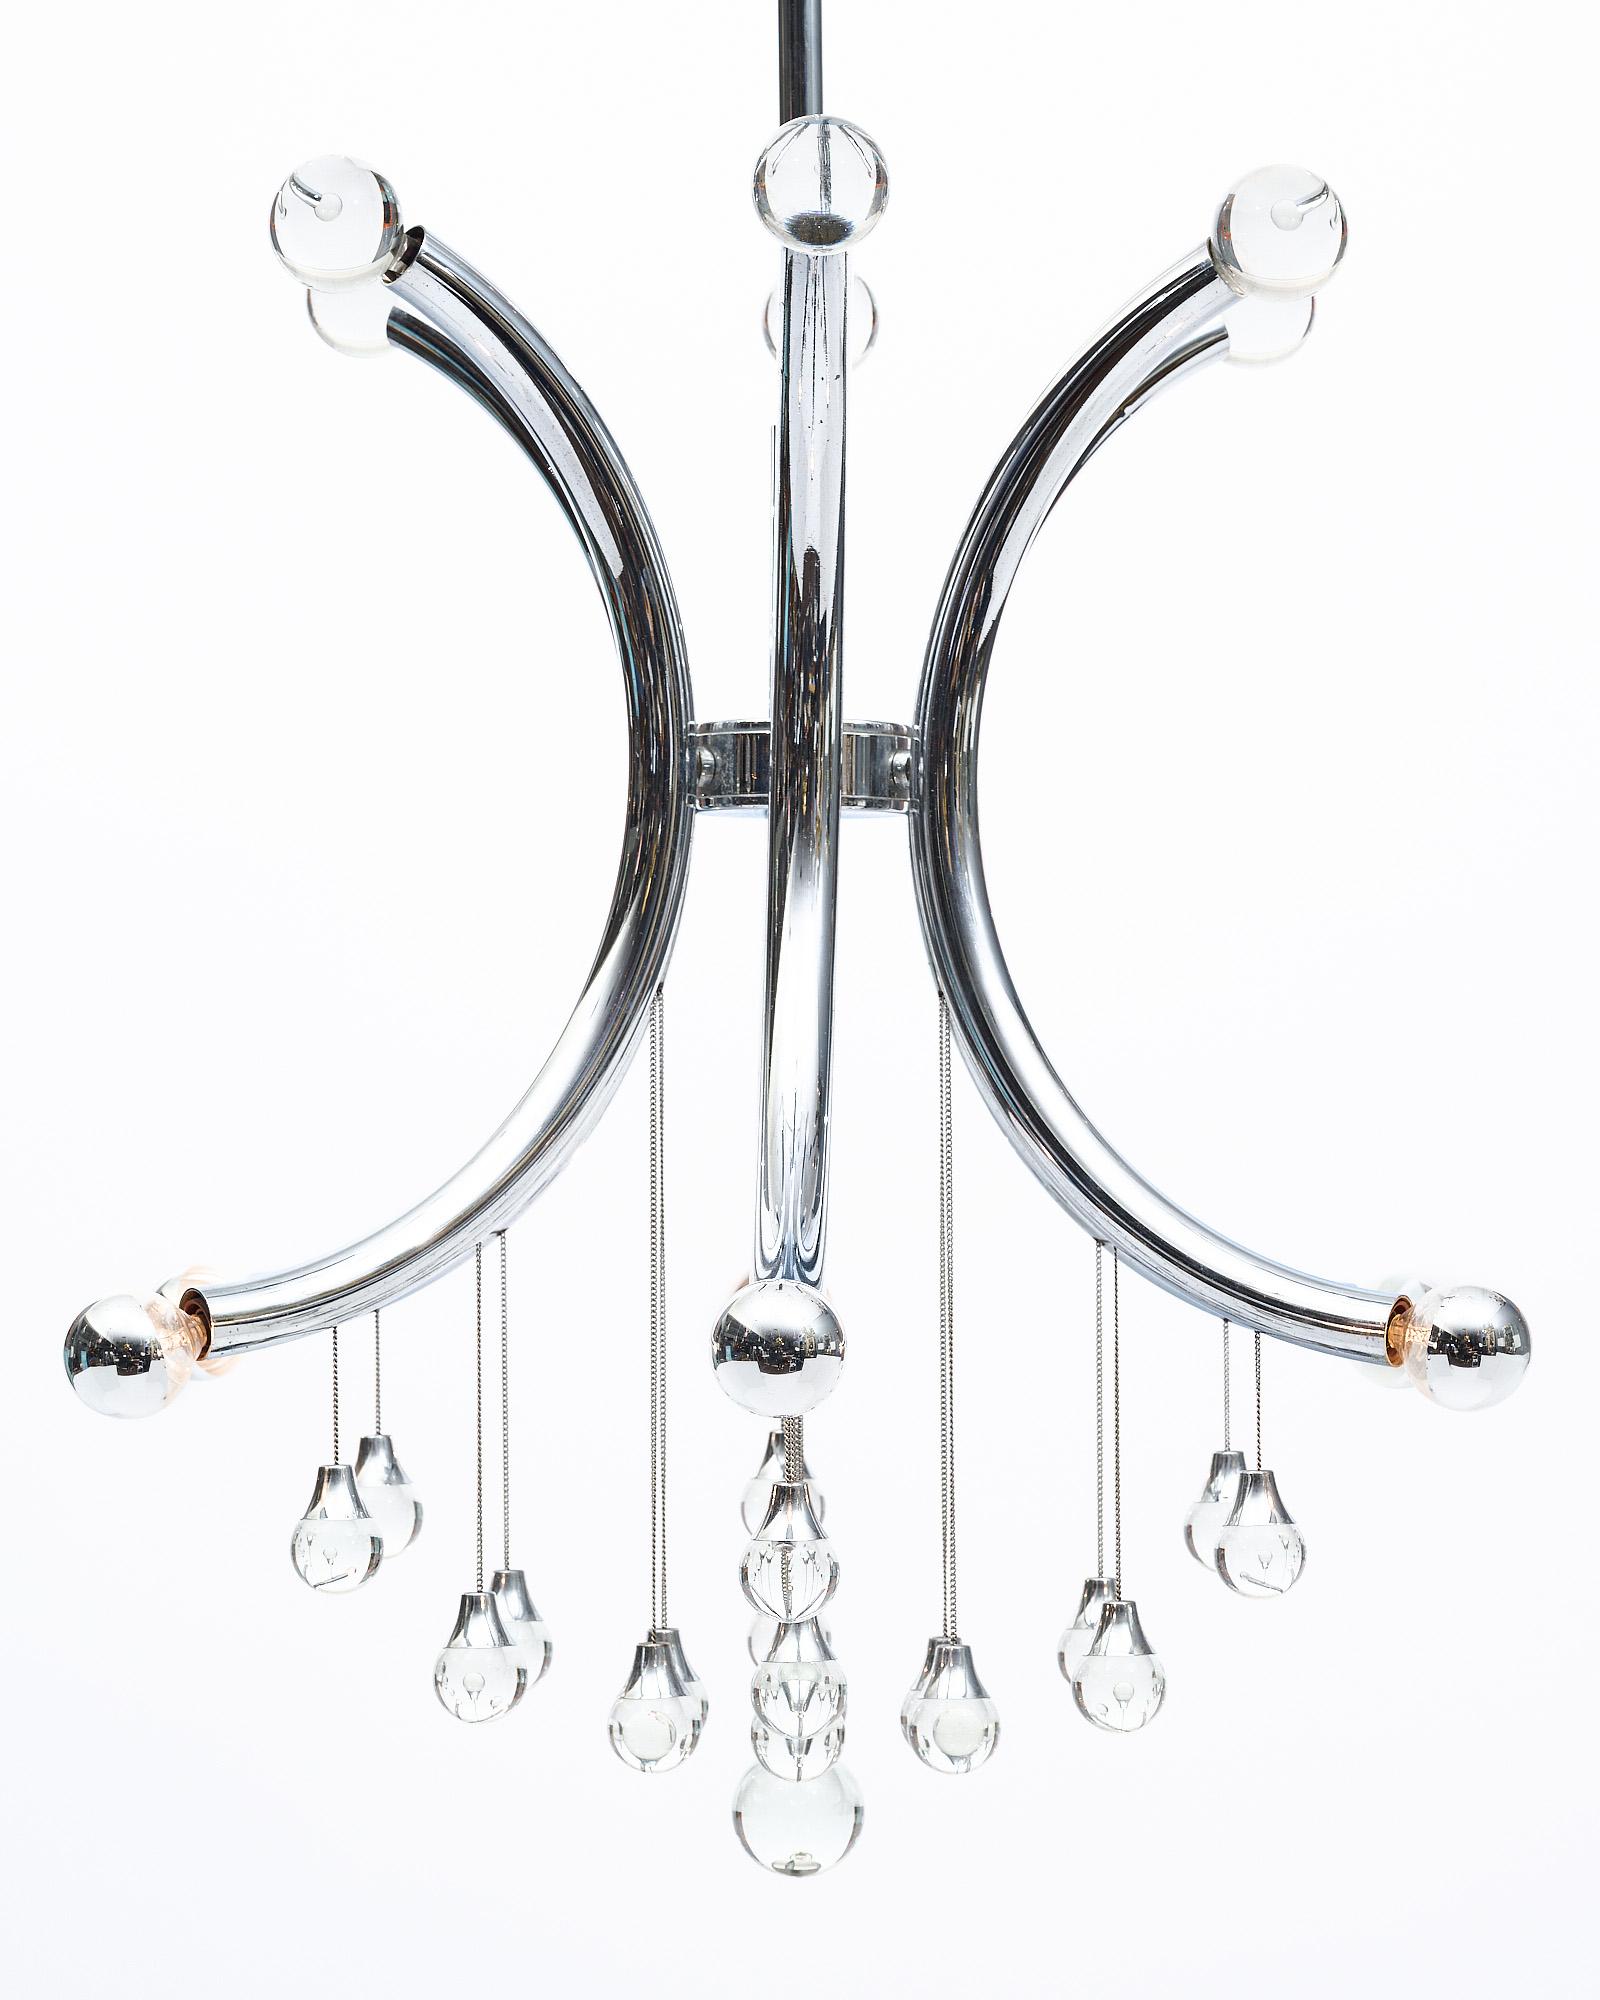 Vintage chandelier from Italy featuring a chrome structure of semicircle arms emanating out from the center. Each arm has a crystal finial at the top and a light at the bottom. The structure has crystal drops falling from the body as well, giving it